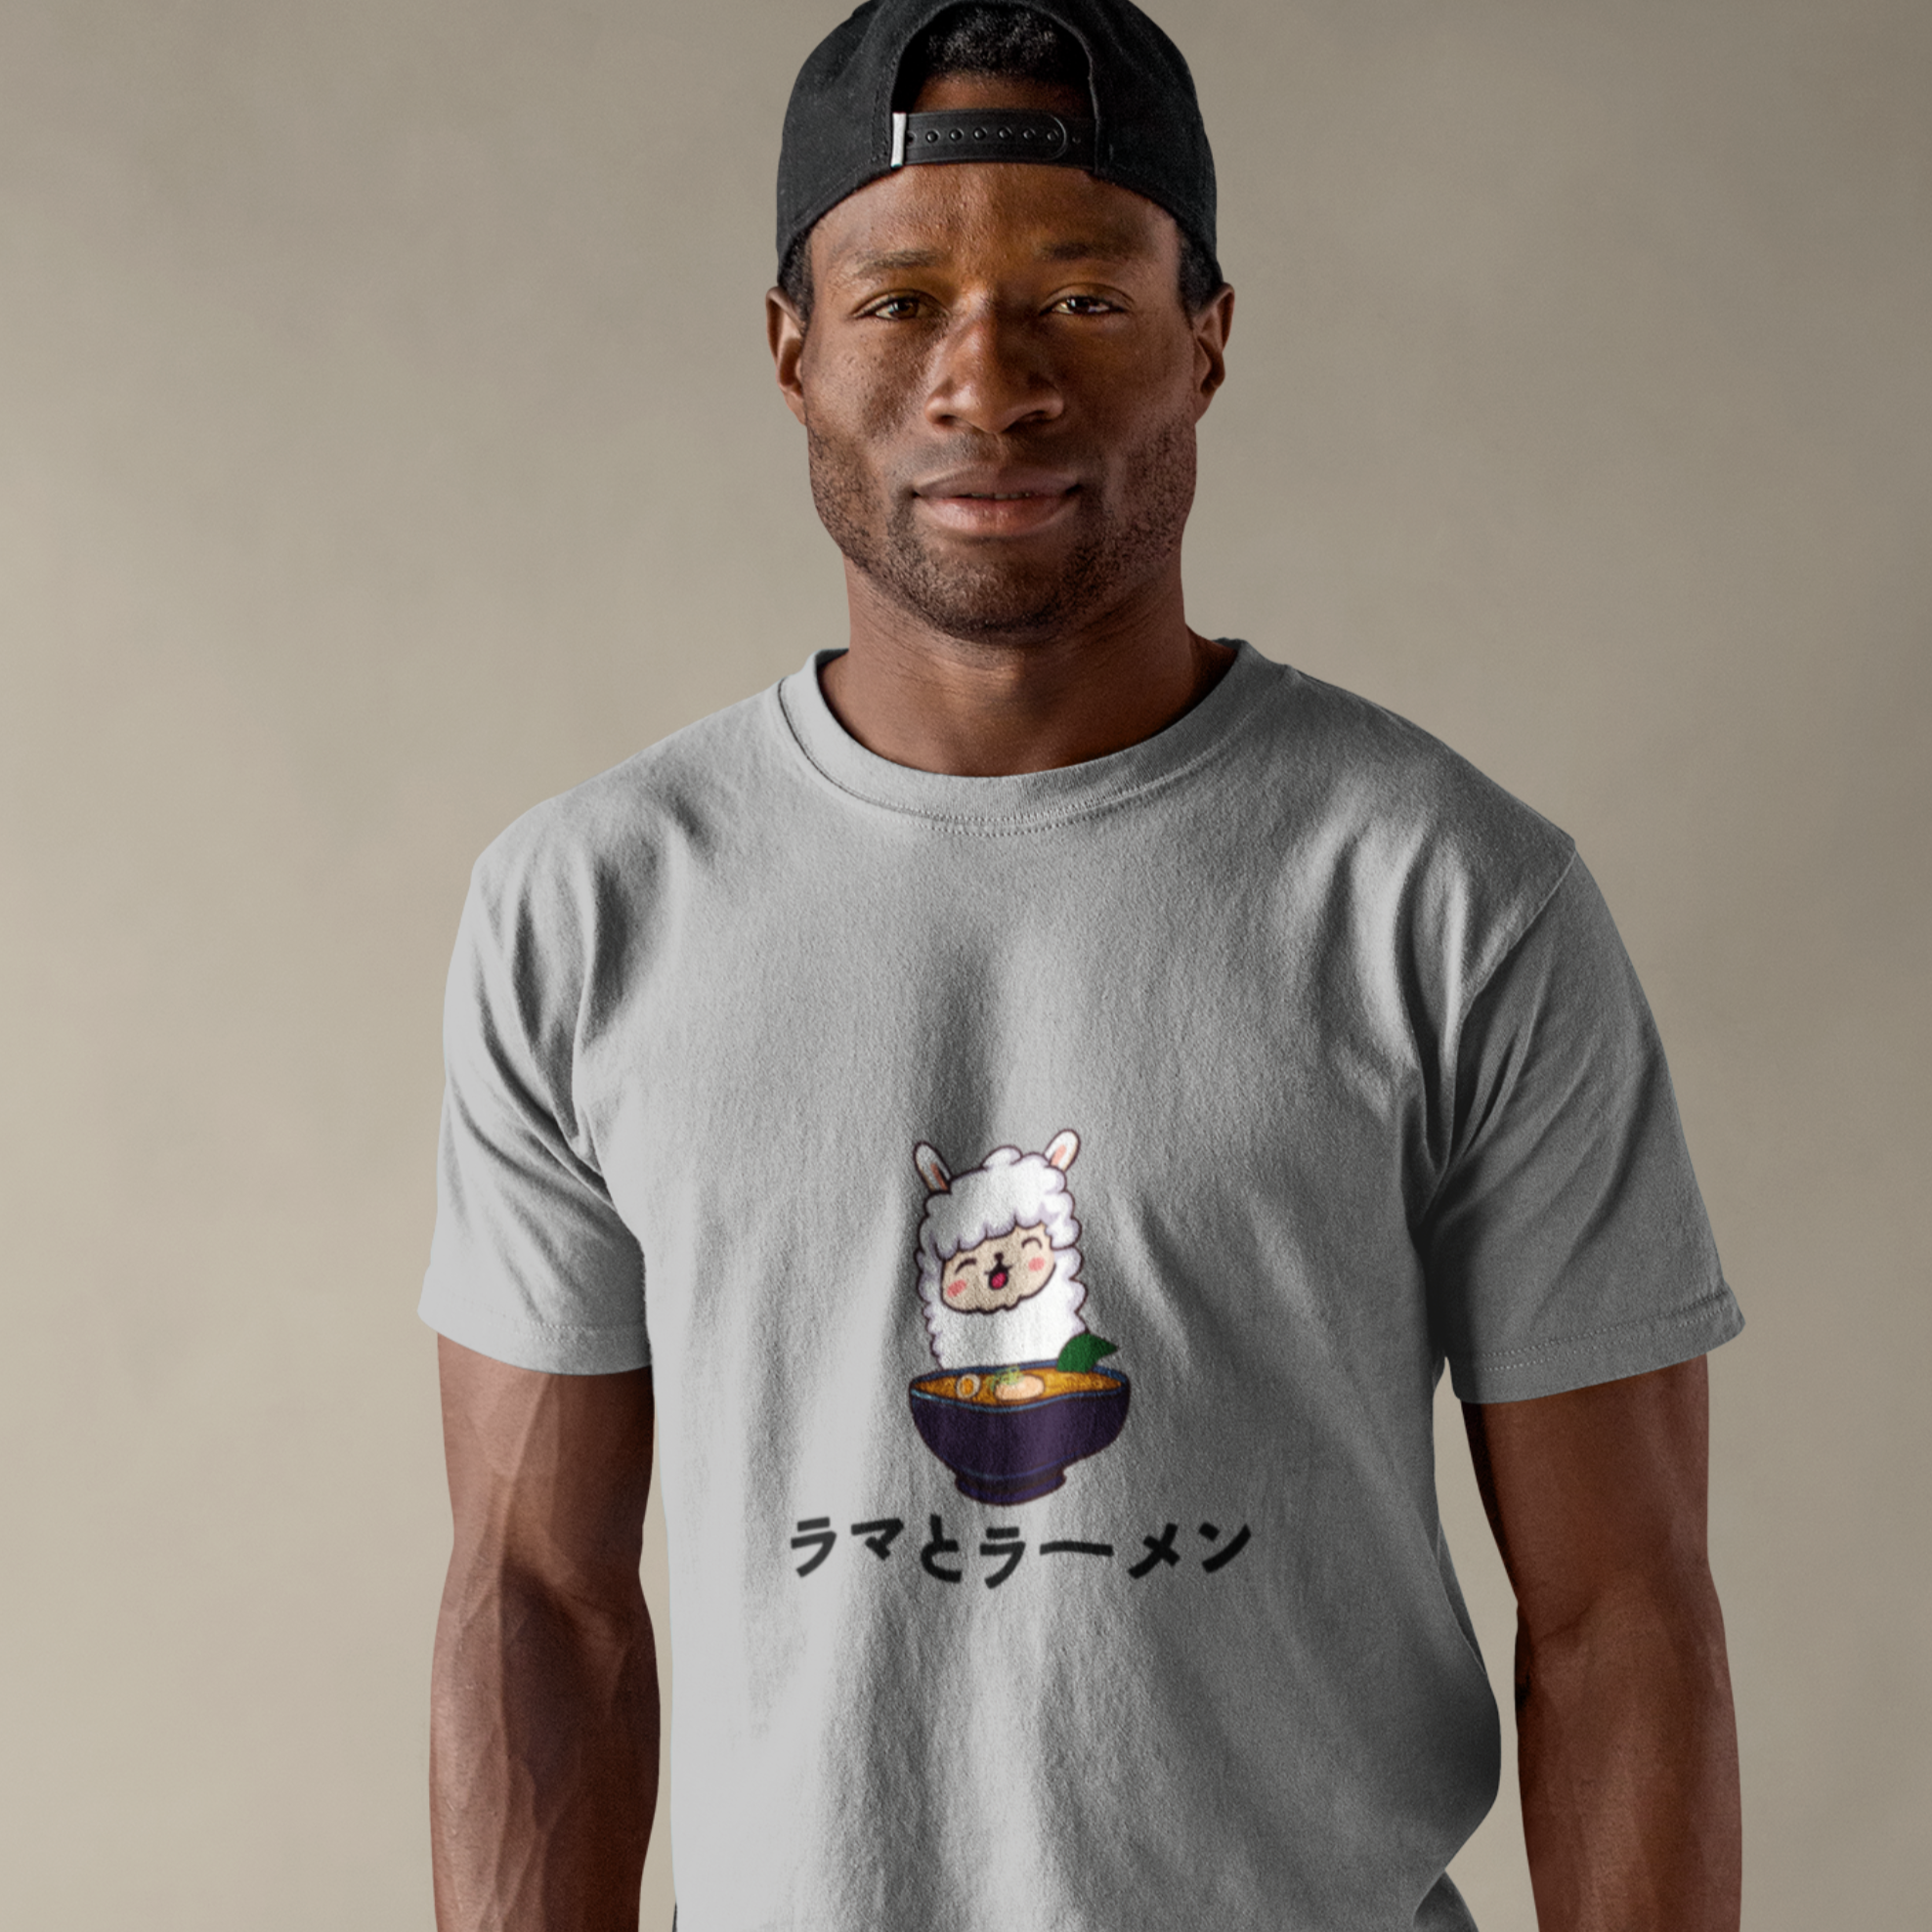 Ramen T-Shirt: Cute Llama and Ramen Art in Japanese Characters - Perfect for Foodie and Japanese Shirt Fans!